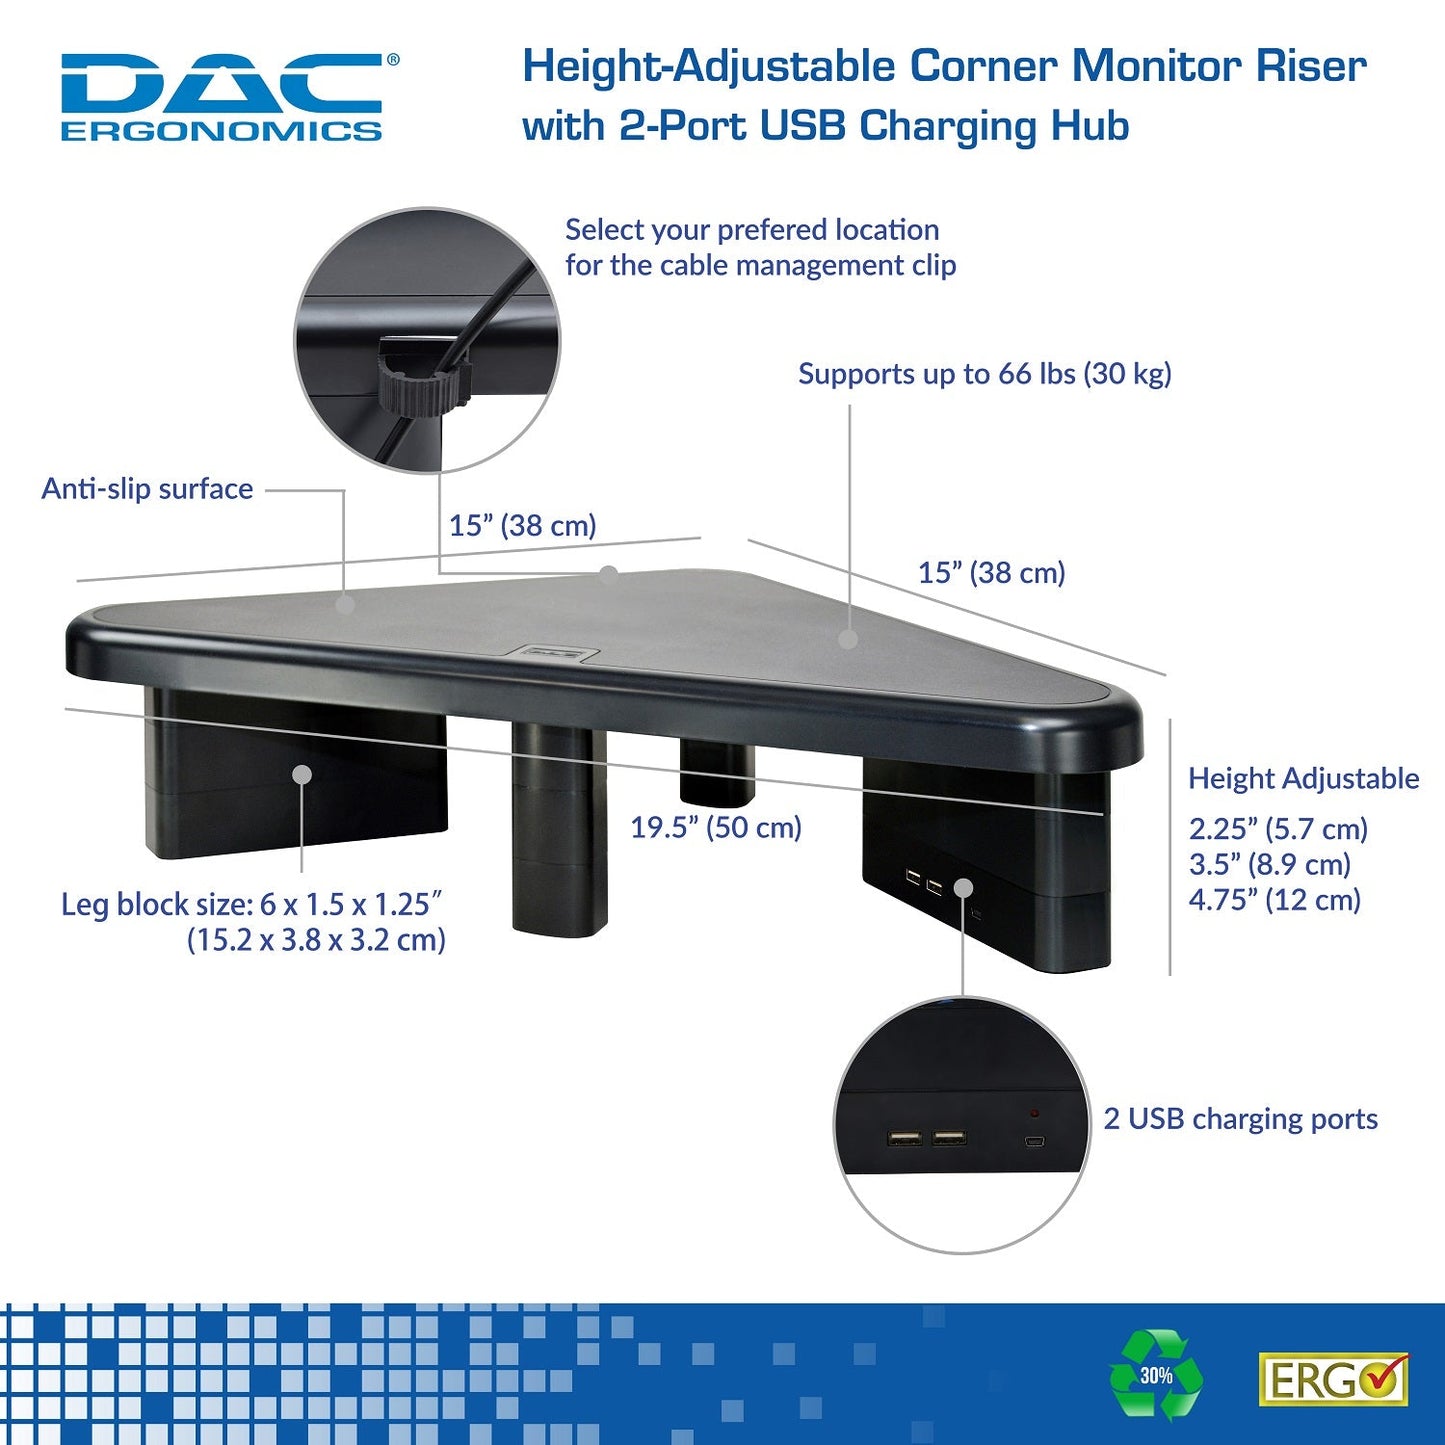 DAC® Stax MP-214 Height-Adjustable Corner Monitor/Laptop Stand with 2-USB Ports, Black